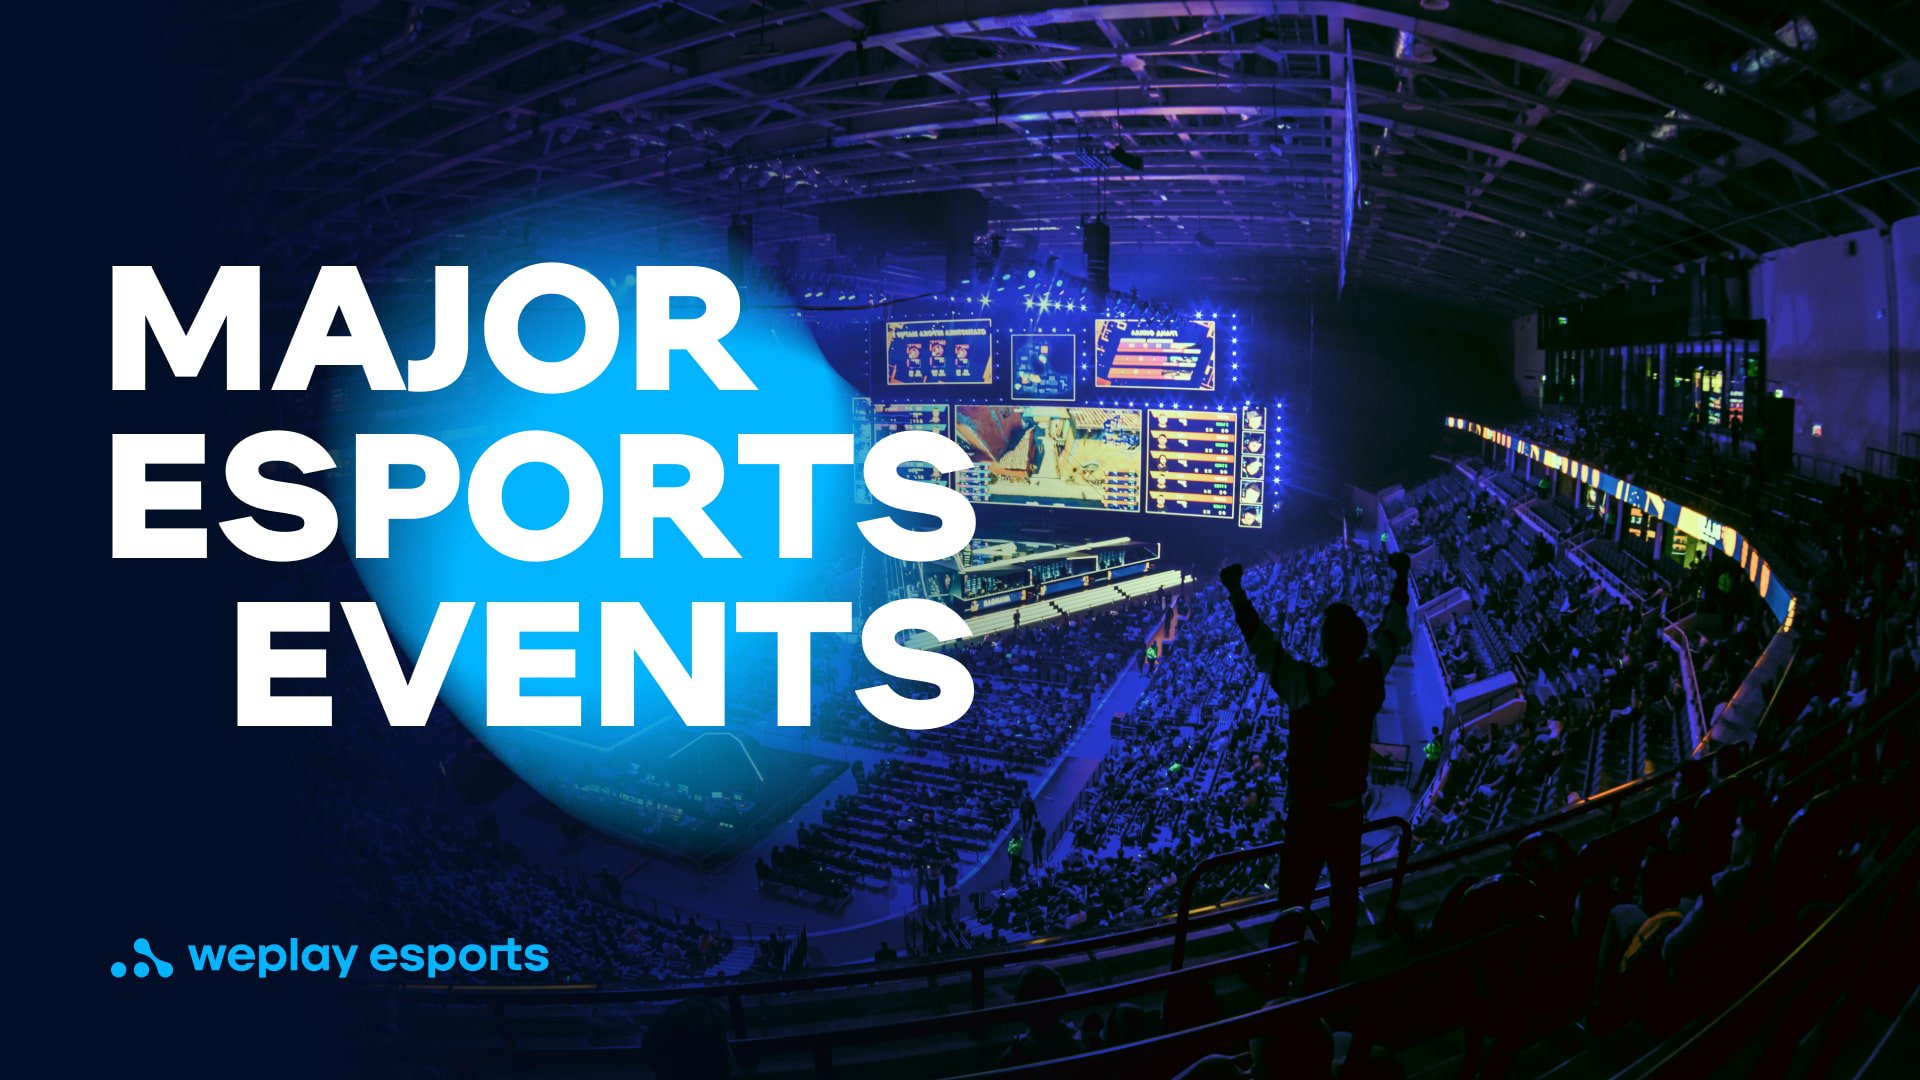 Major Esports Events. Credits: WePlay Holding